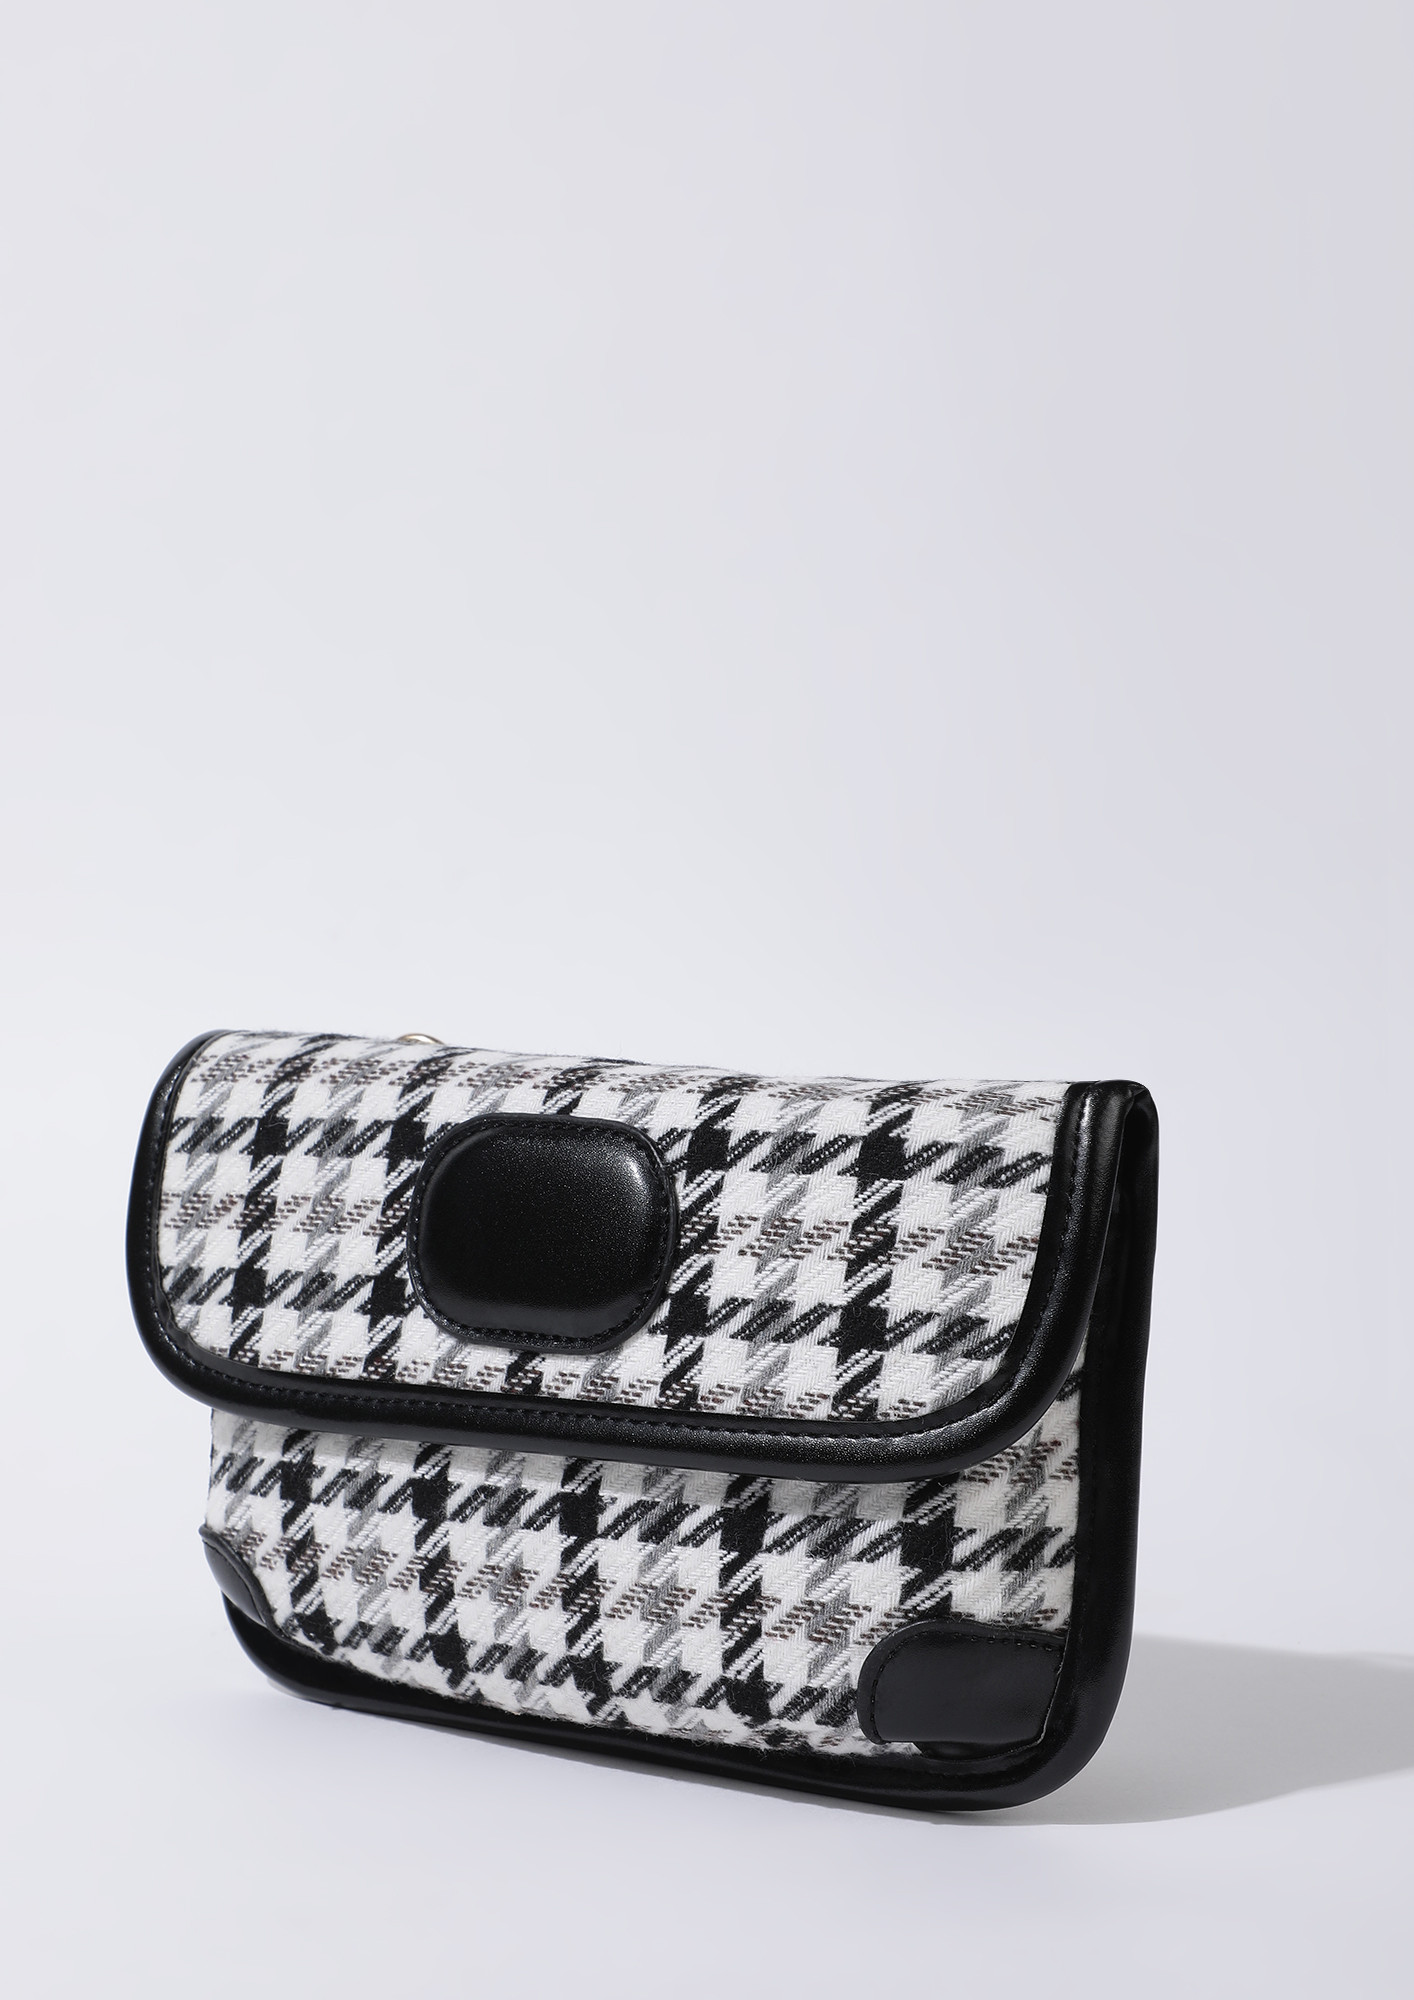 WOVEN WITH CARE BLACK WHITE SLING BAG